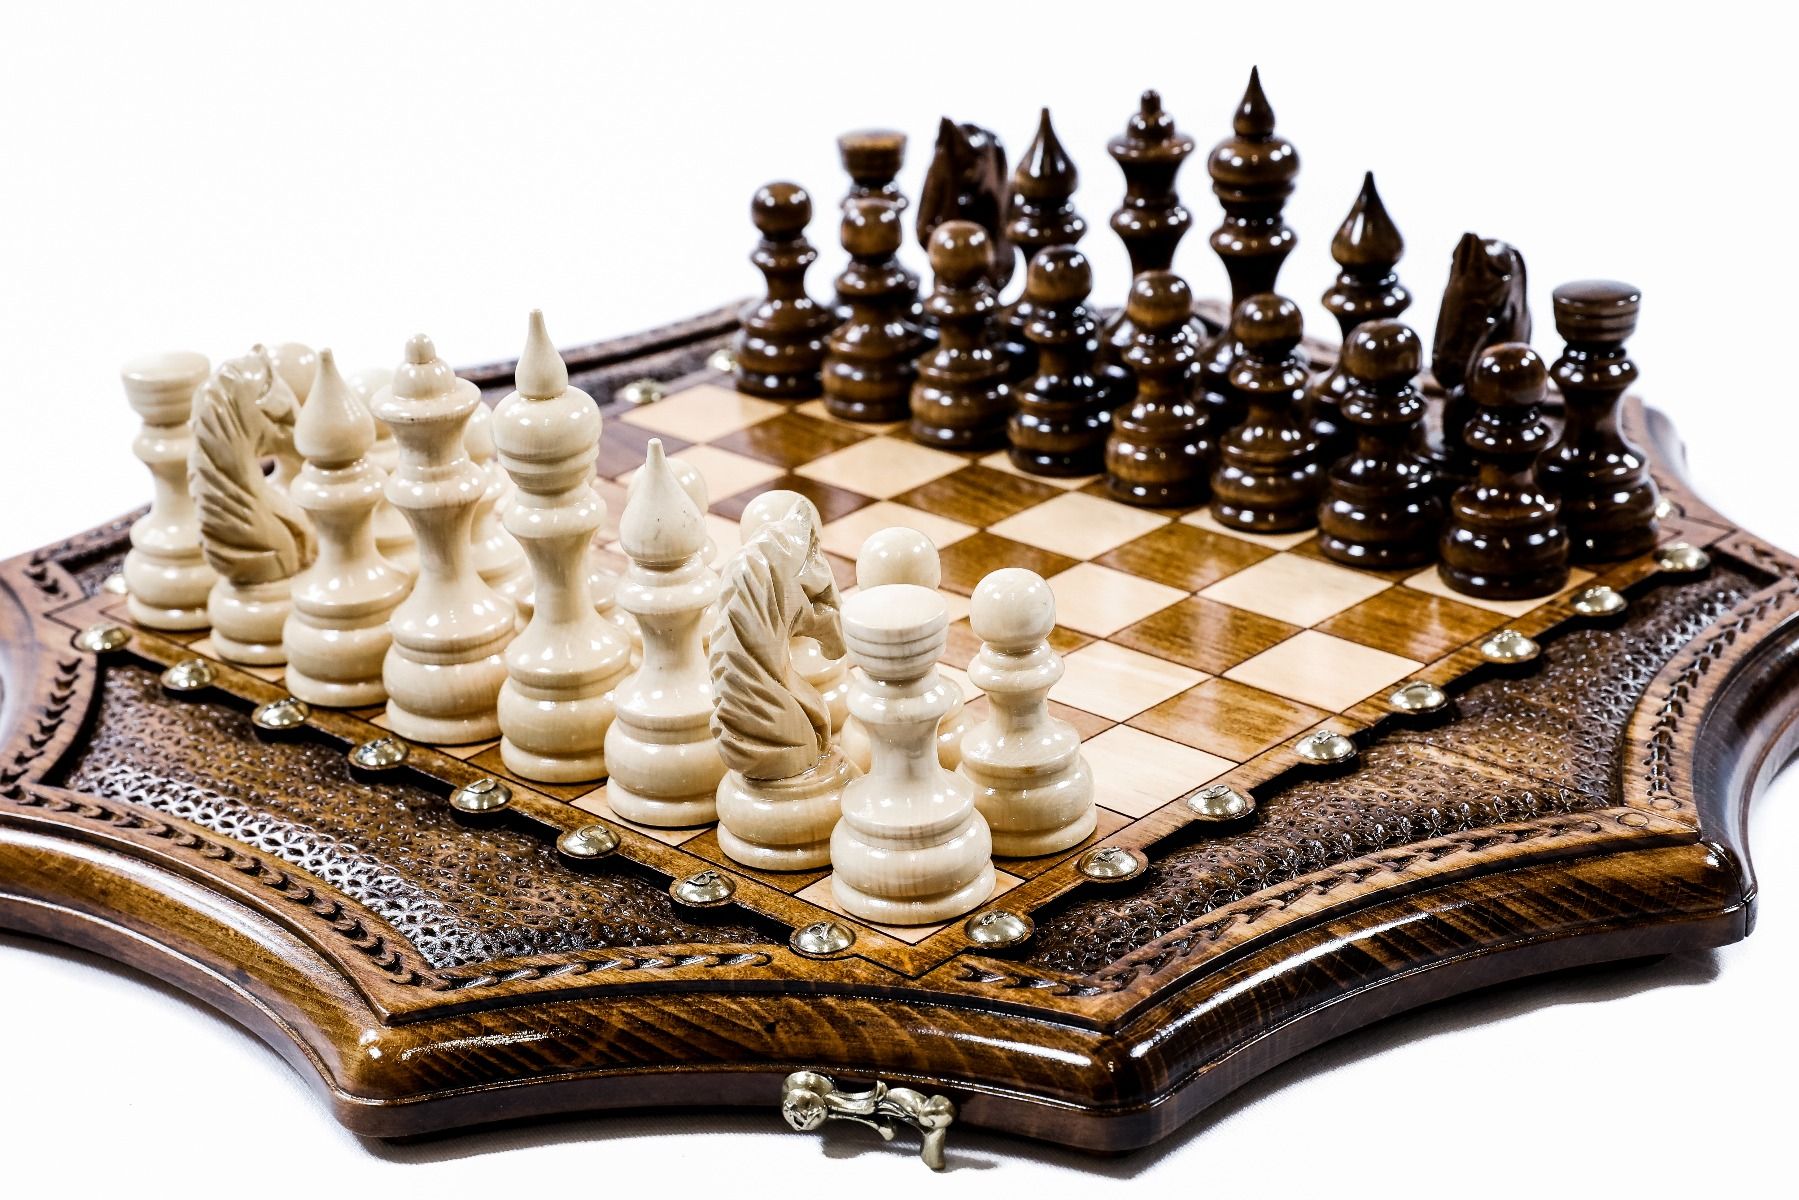 Dive into the world of luxury chess with a set that combines classic strategy with unique, artisanal craftsmanship and sophisticated design.